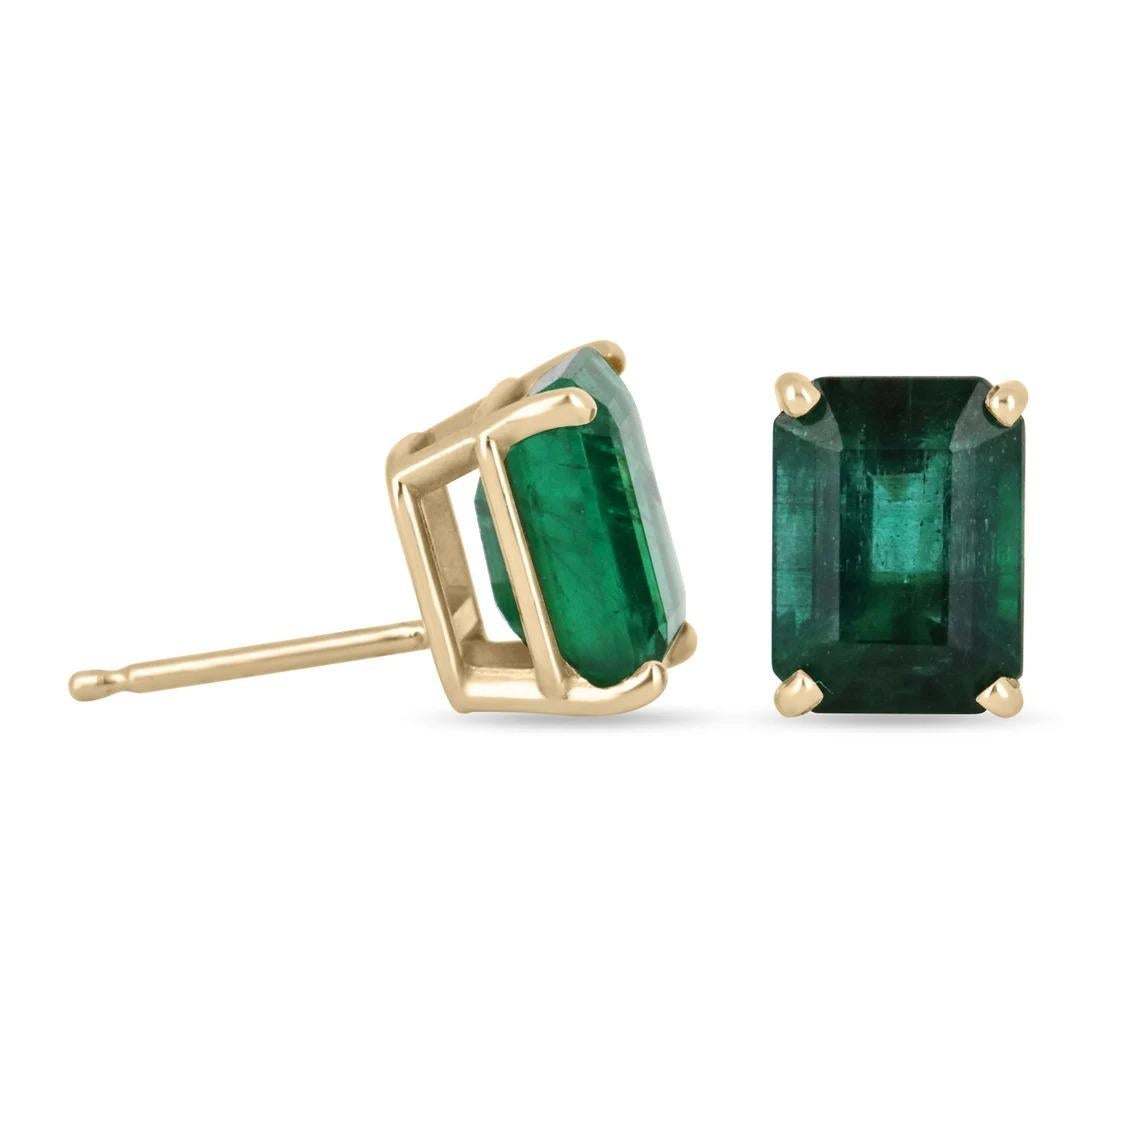 Featured here is a beautiful set of AAA VIVID dark forest green emerald cut emerald studs in solid fine 18K solid yellow gold. Displayed are very large RARE statement size dark green emeralds with very good transparency, accented by a simple